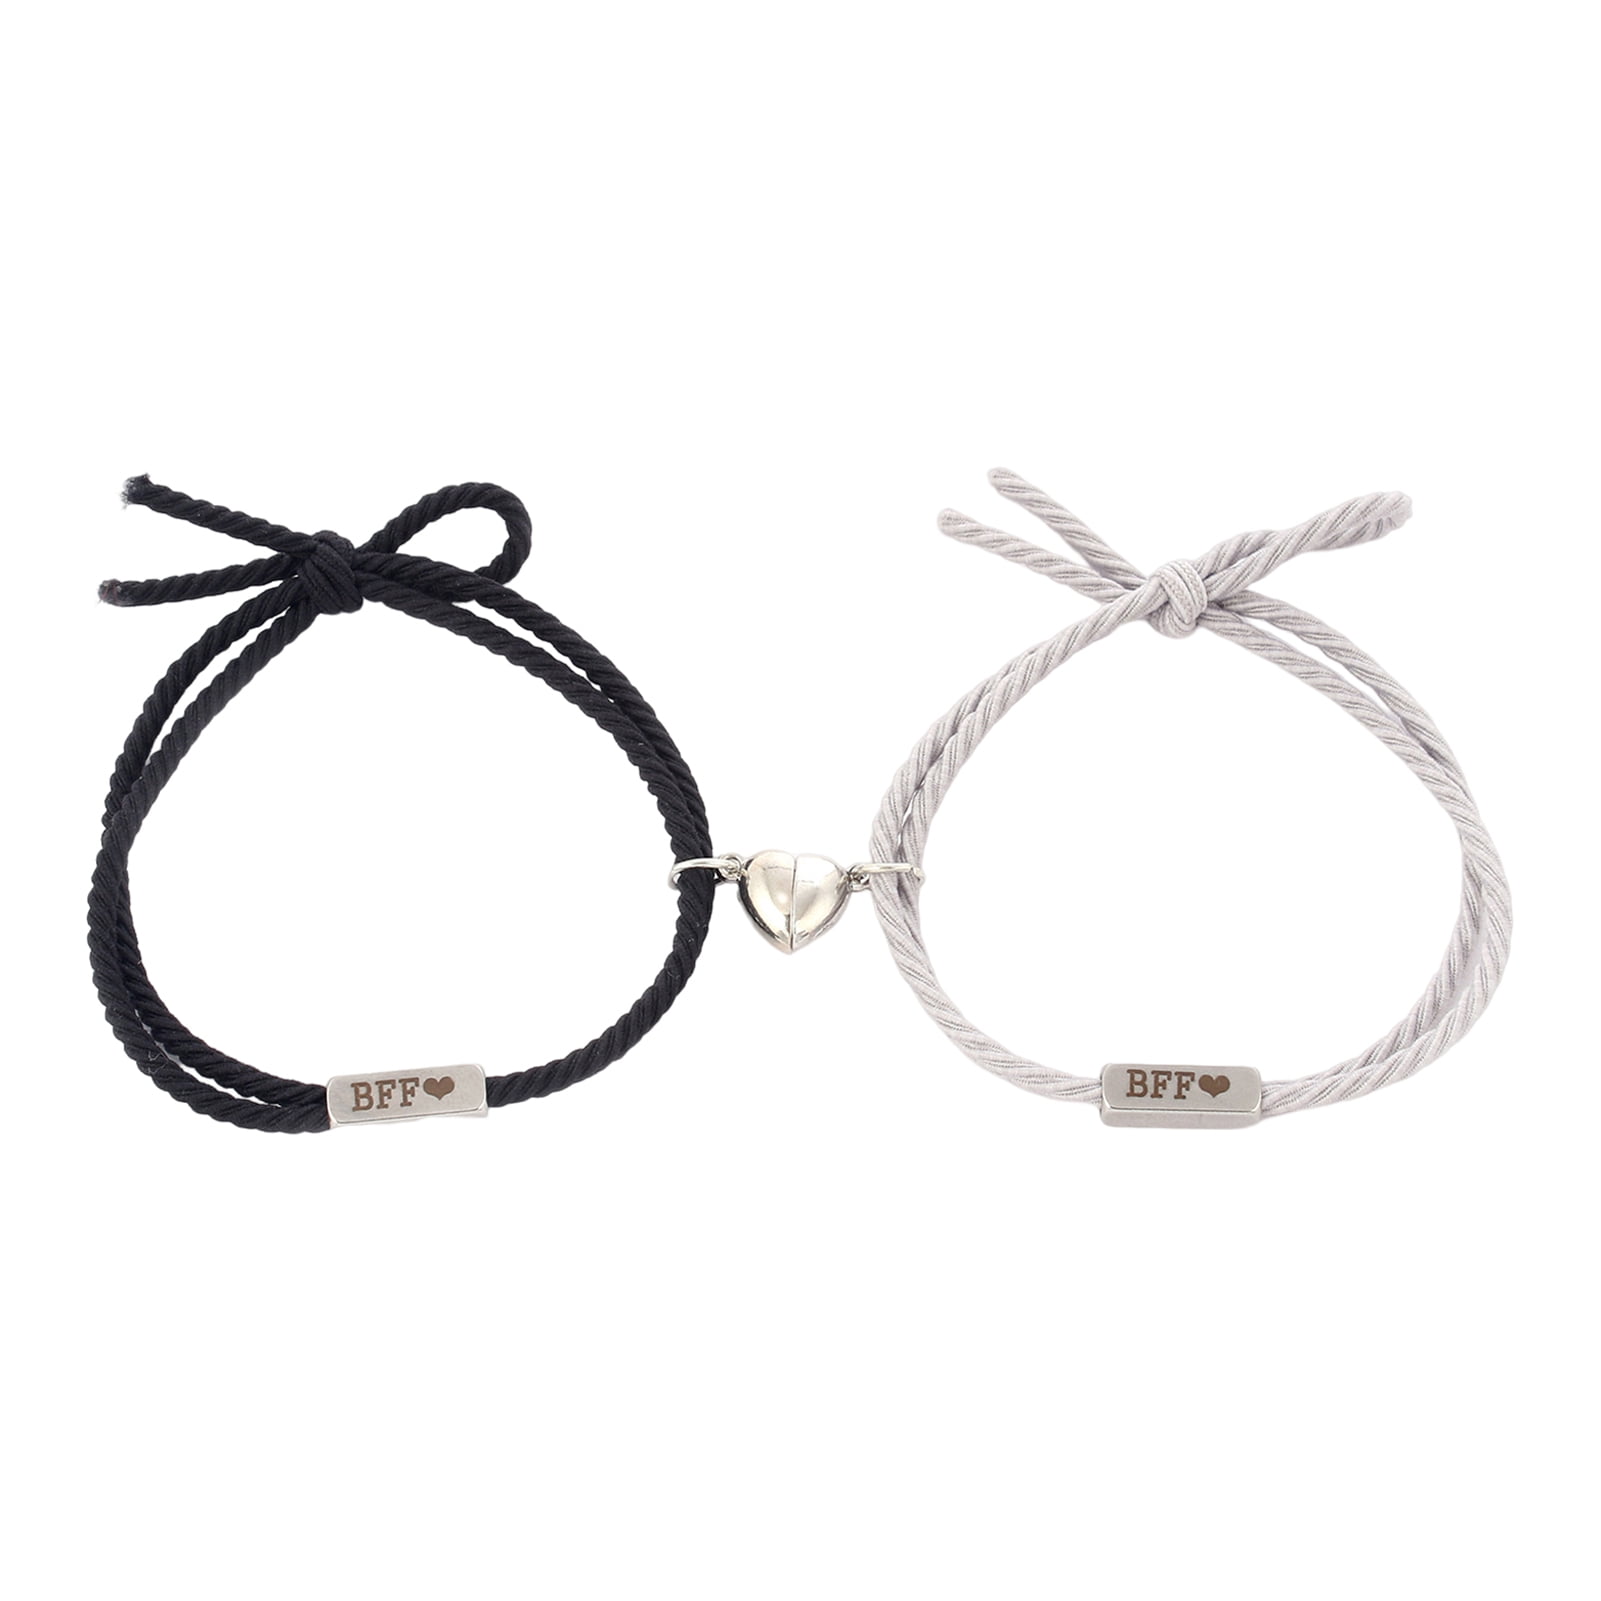 Gift Magnetic Heart Bracelets that write with your names as a constant  reminder of your love - Aron closet